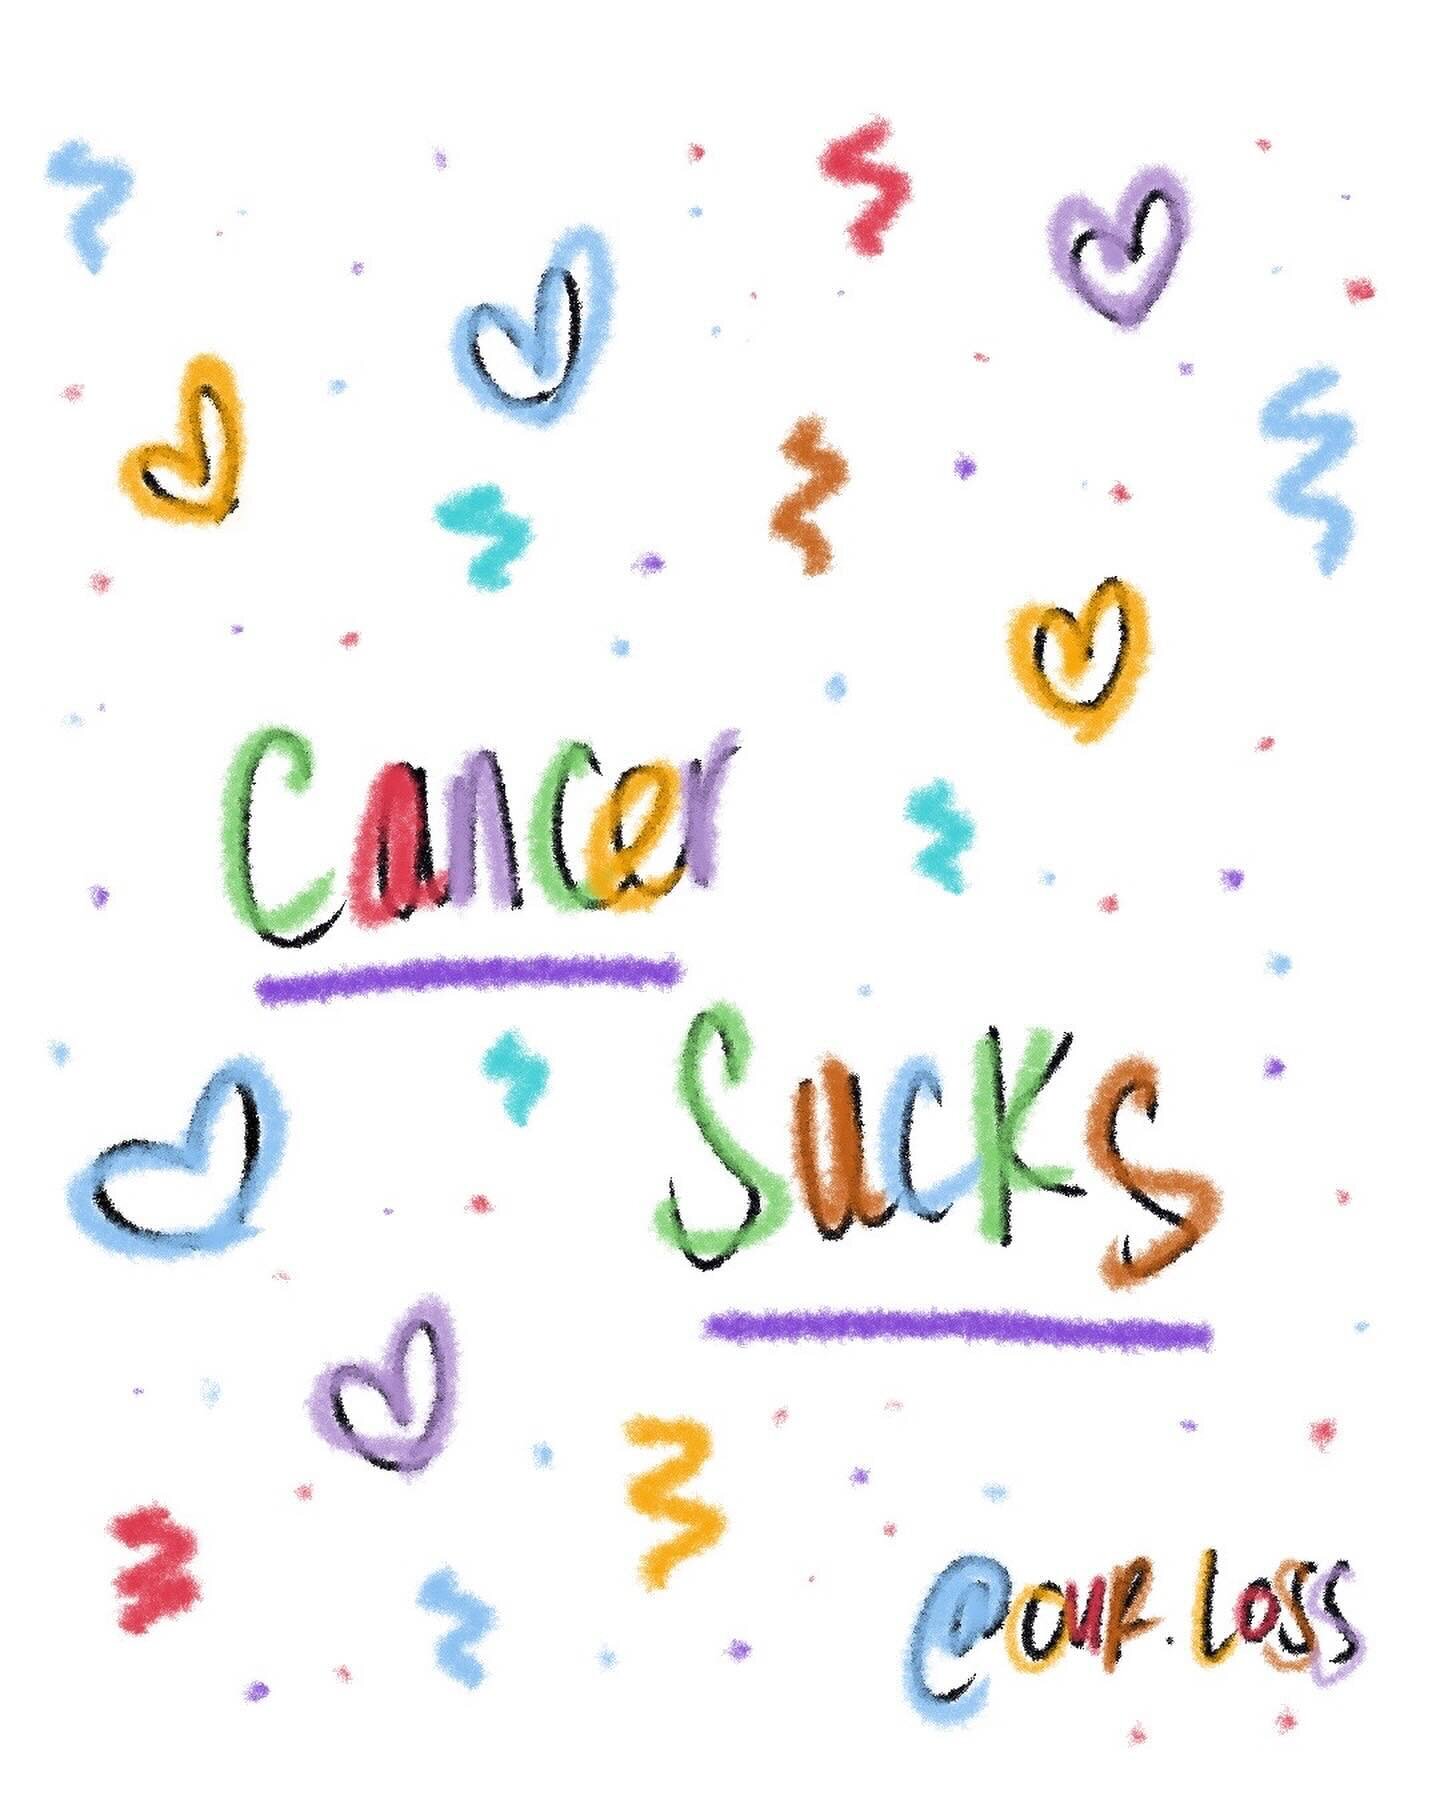 Cancer 
Sucks

Cancer killed both my husband&rsquo;s parents. 

It killed my Pappou.

My Baba had breast cancer.

It took too many of my friends parents lives. 

Even children. 

Cancer is unforgiving and it doesn&rsquo;t care who you are. 

Cancer S